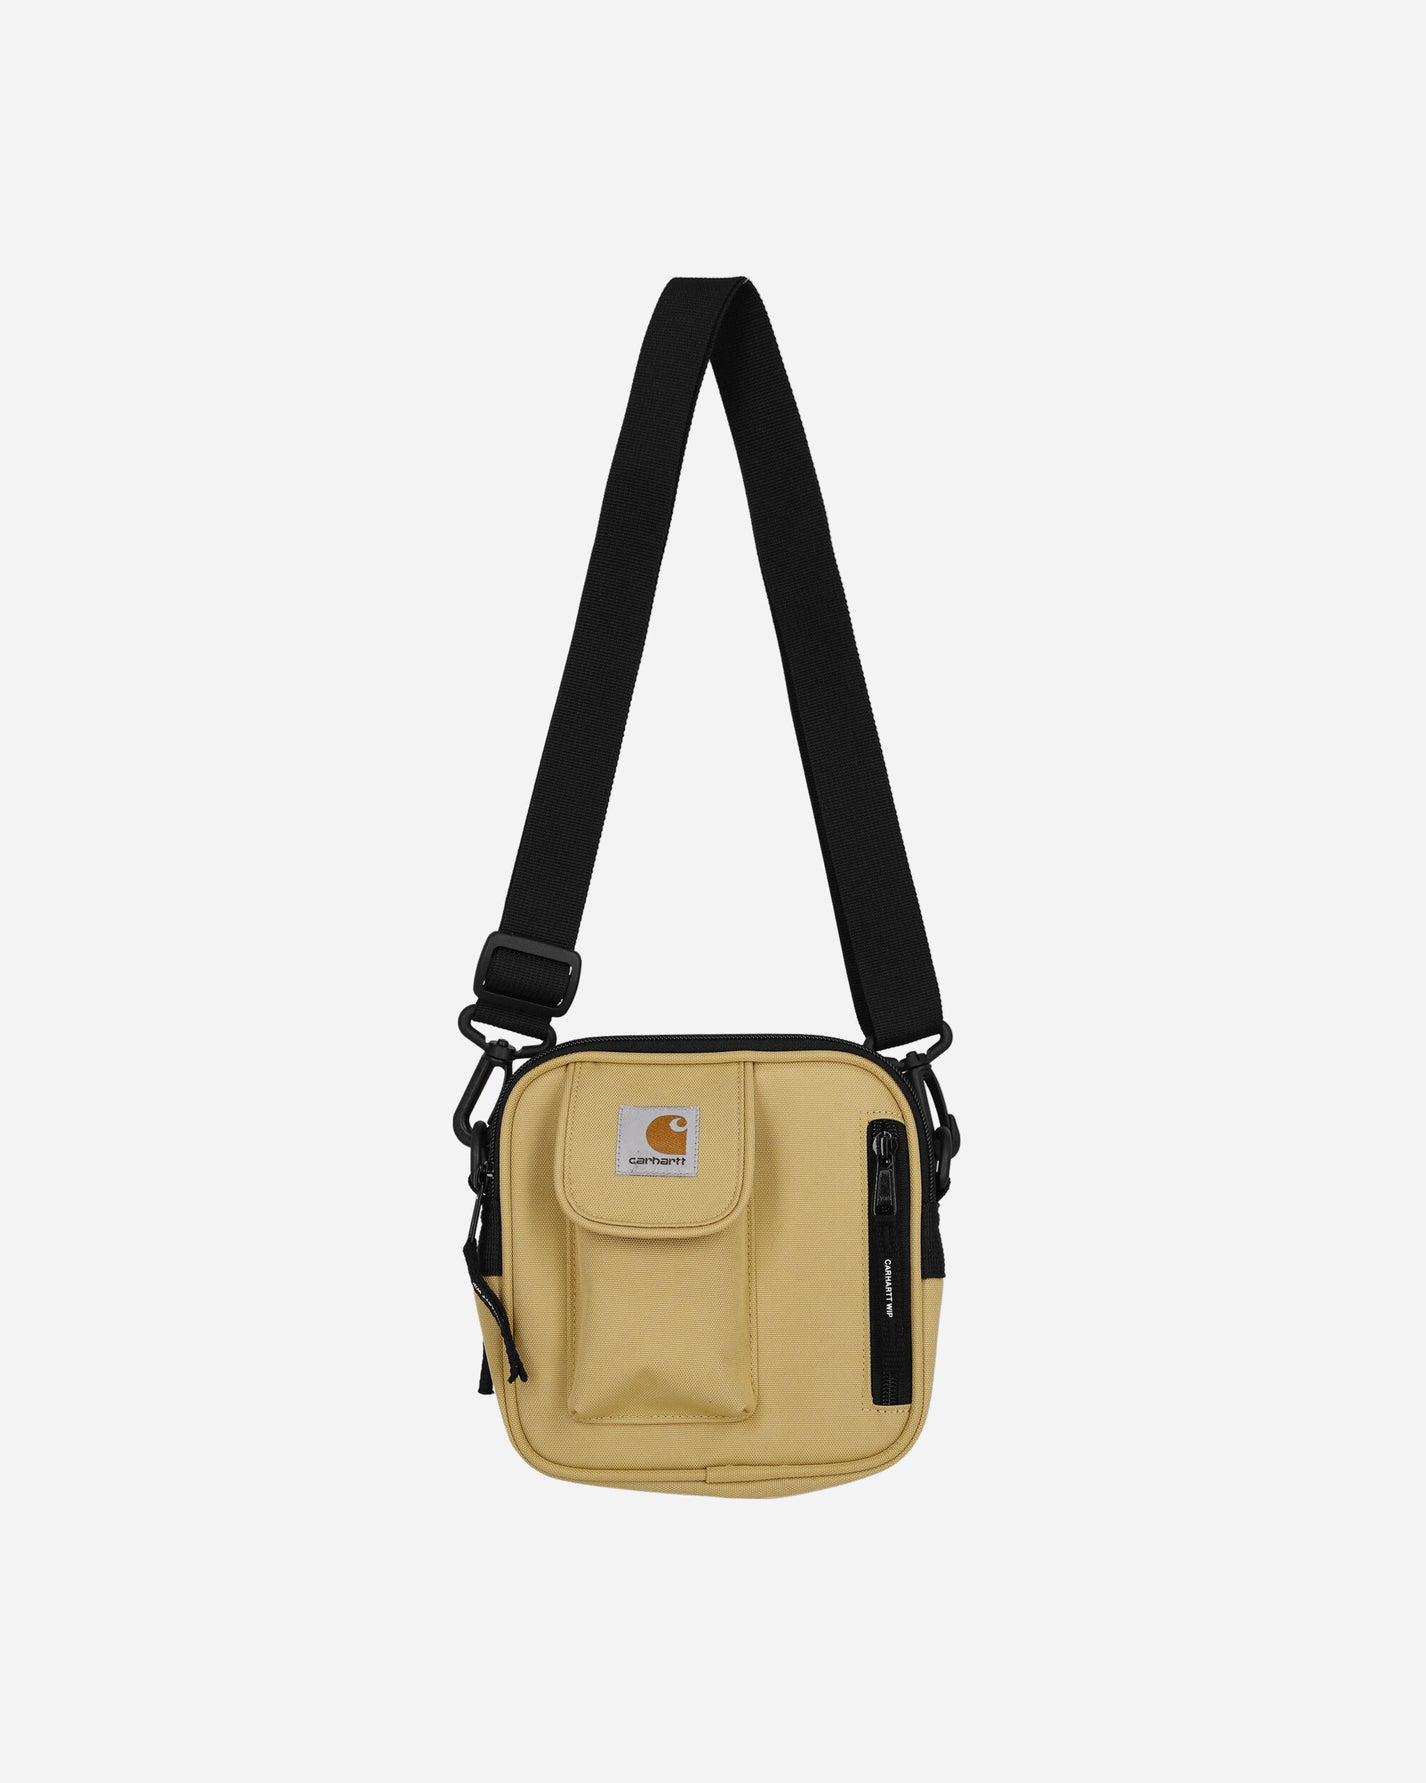 Carhartt WIP Essentials Bag Bourbon Bags and Backpacks Shoulder Bags I031470 1YHXX